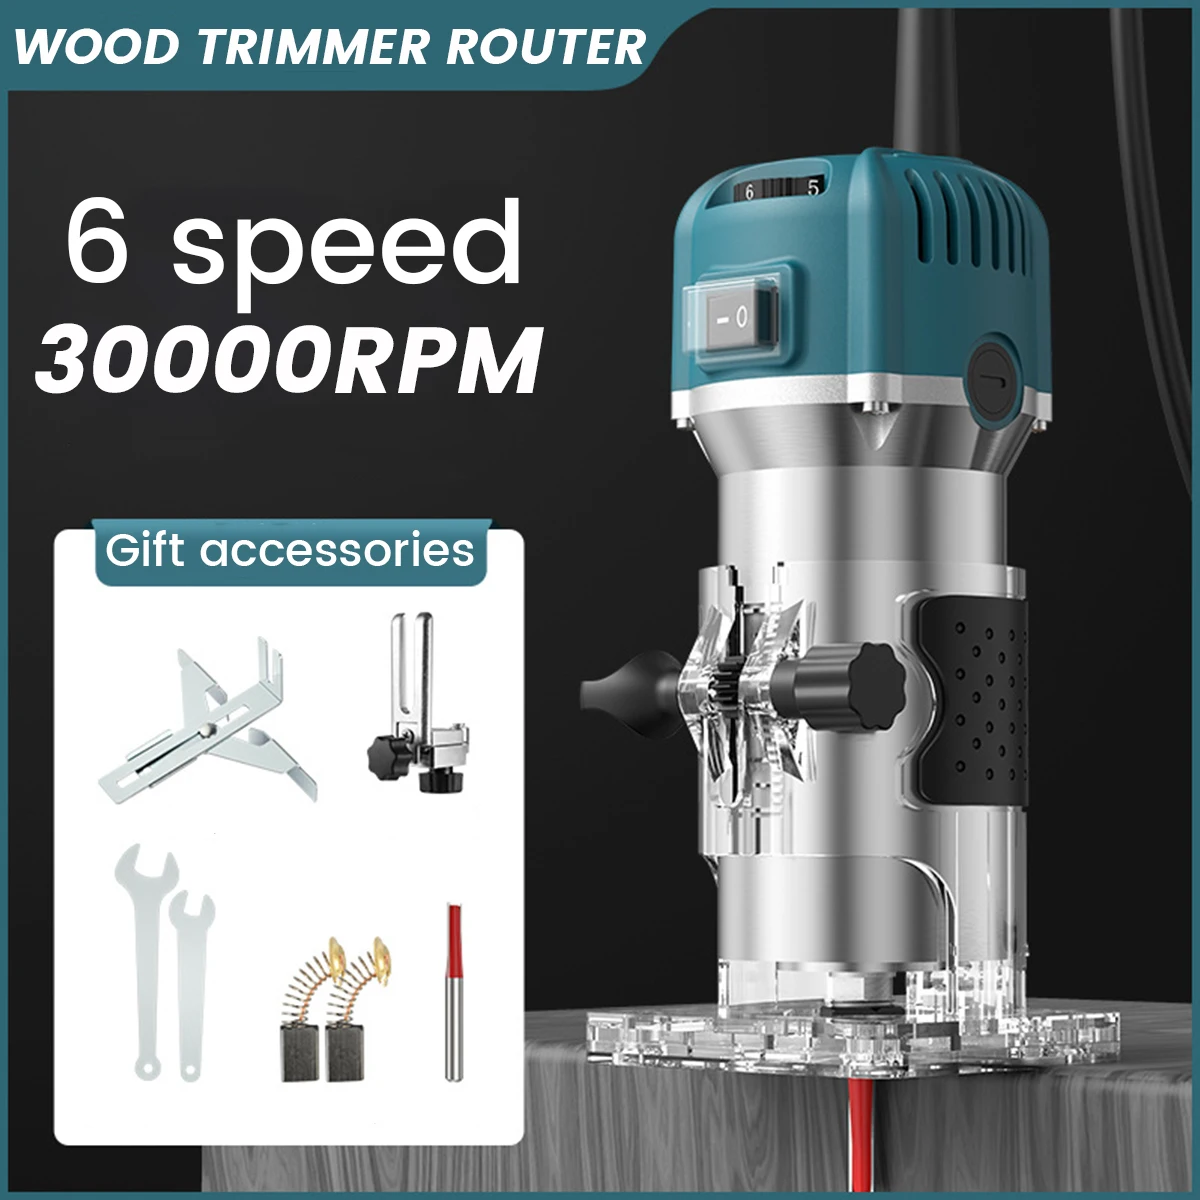 

800W Wood Router Tool Woodworking Electric Trimmer 30000RPM 6 Variable Speed Wood Milling Engraving Slotting Trimming Machine